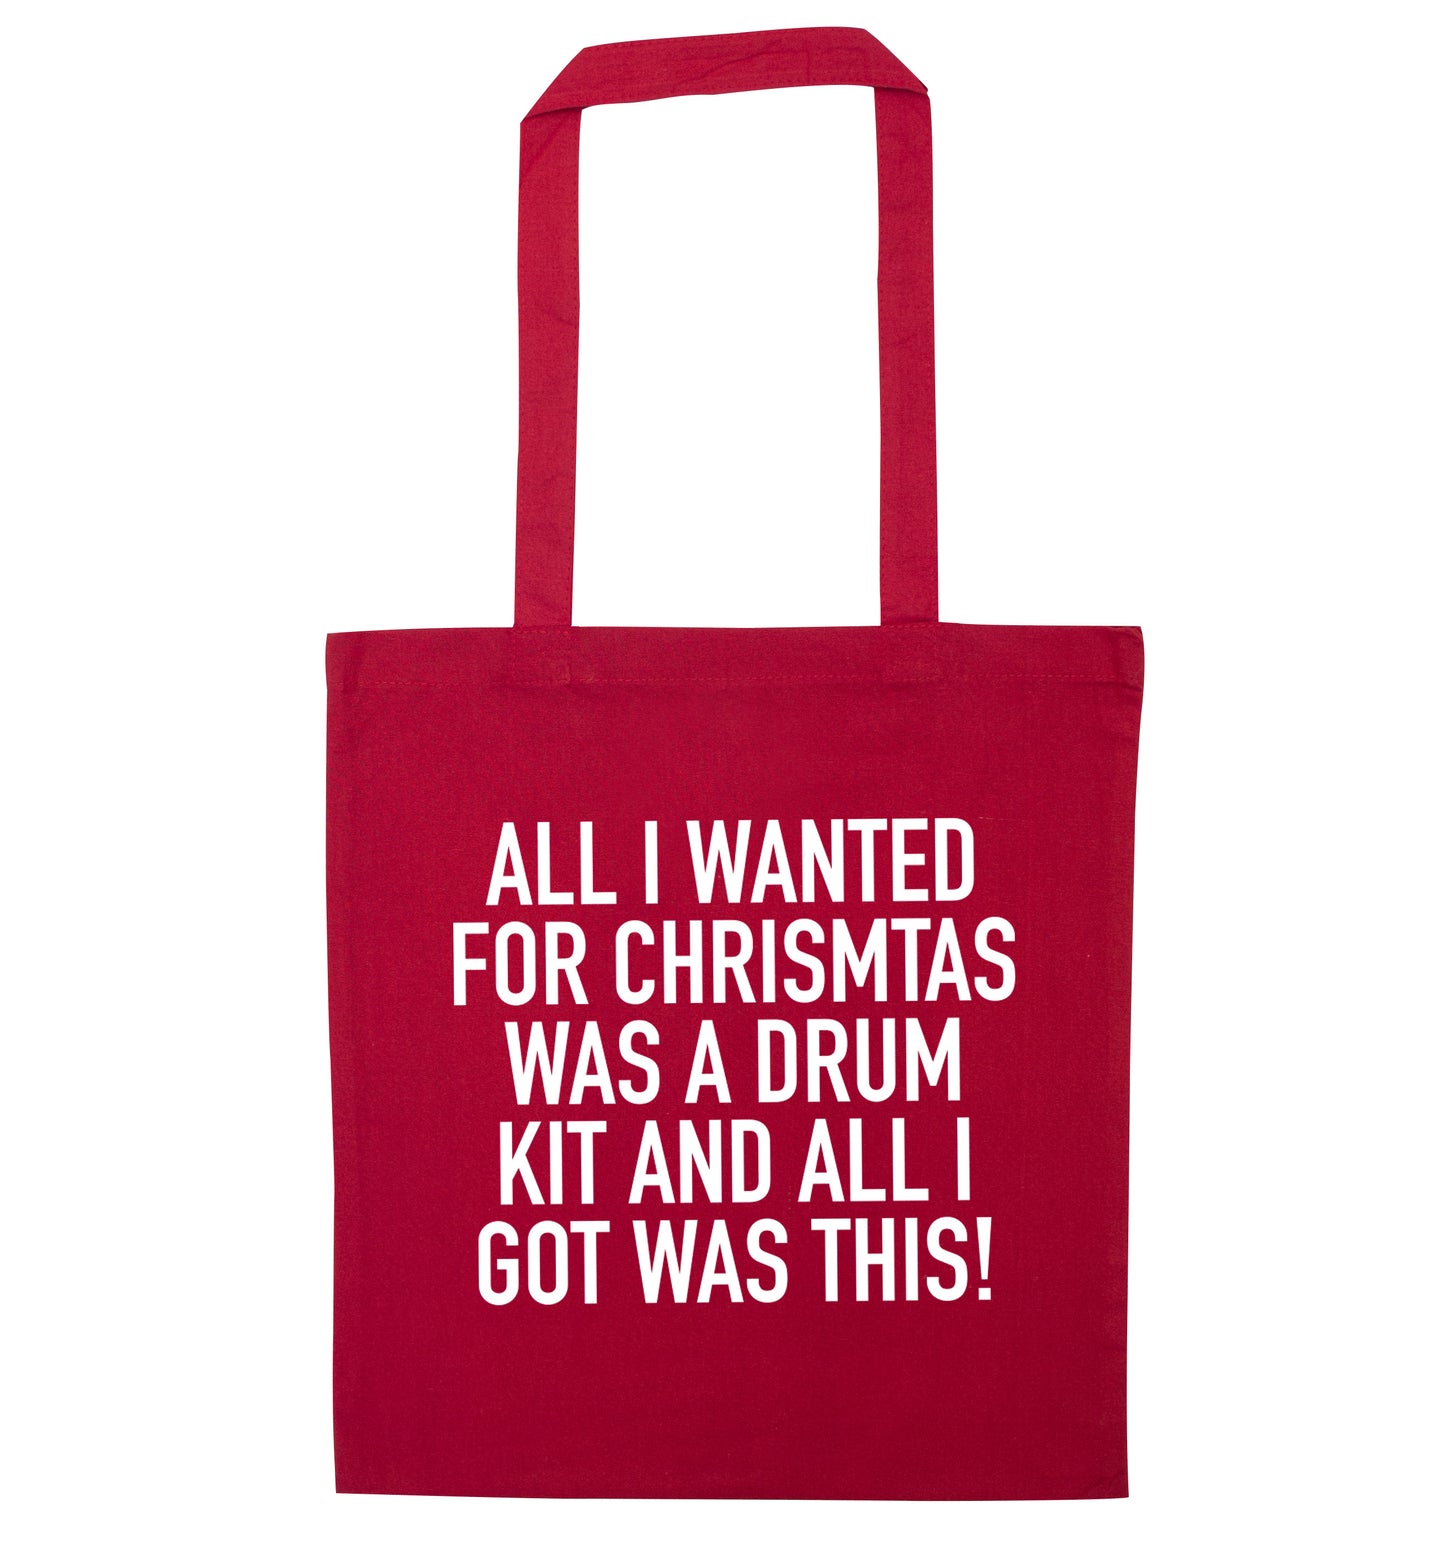 All I wanted for Christmas was a drum kit and all I got was this! red tote bag